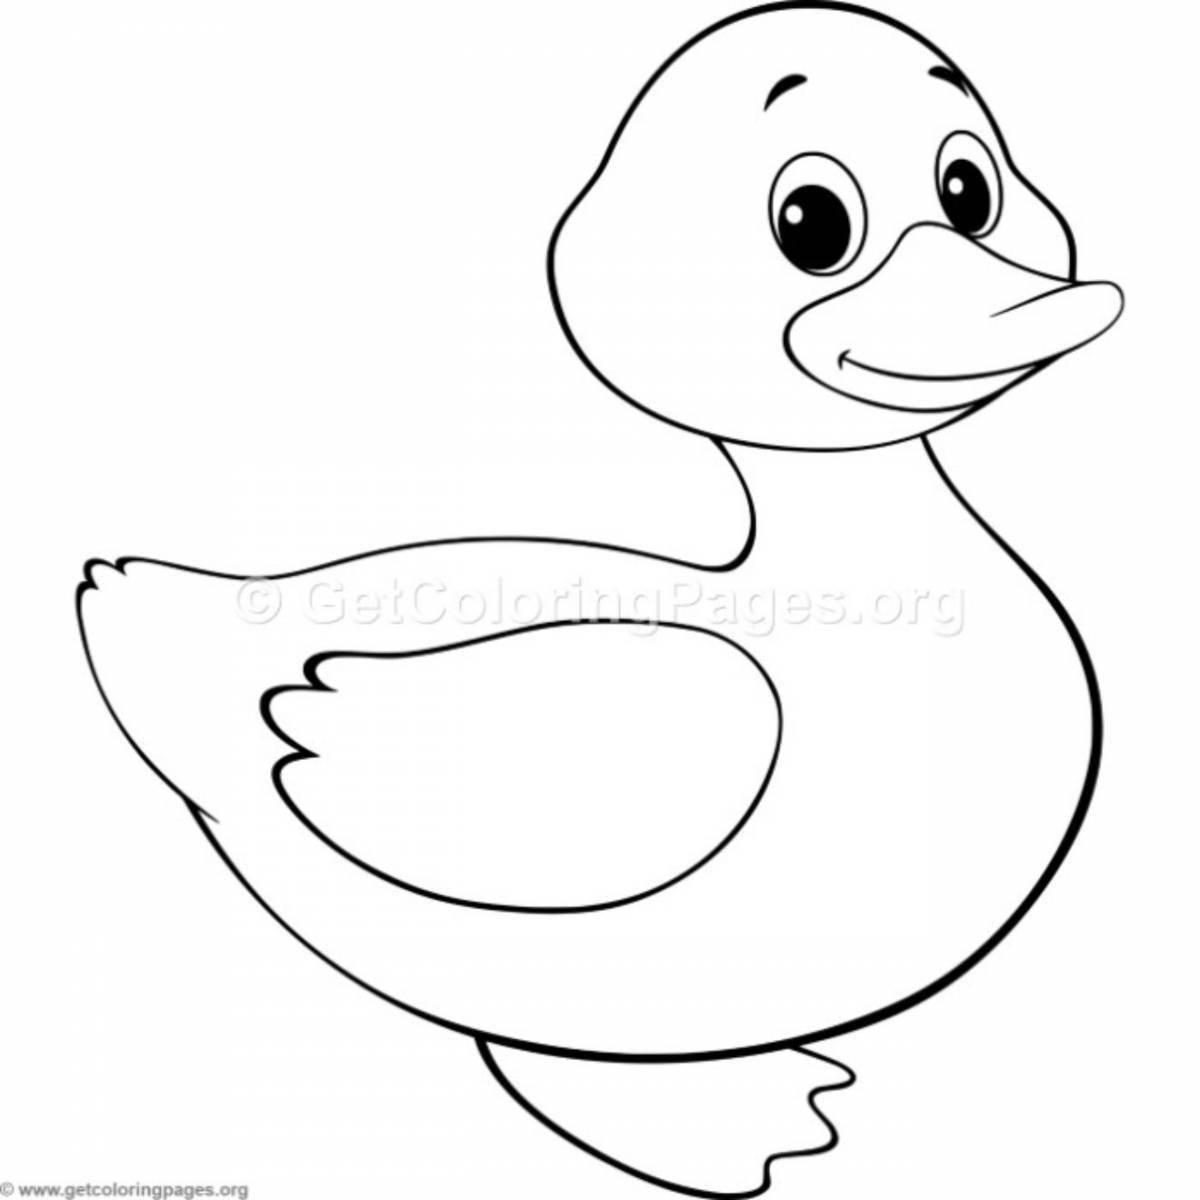 Luminous rubber duck coloring page